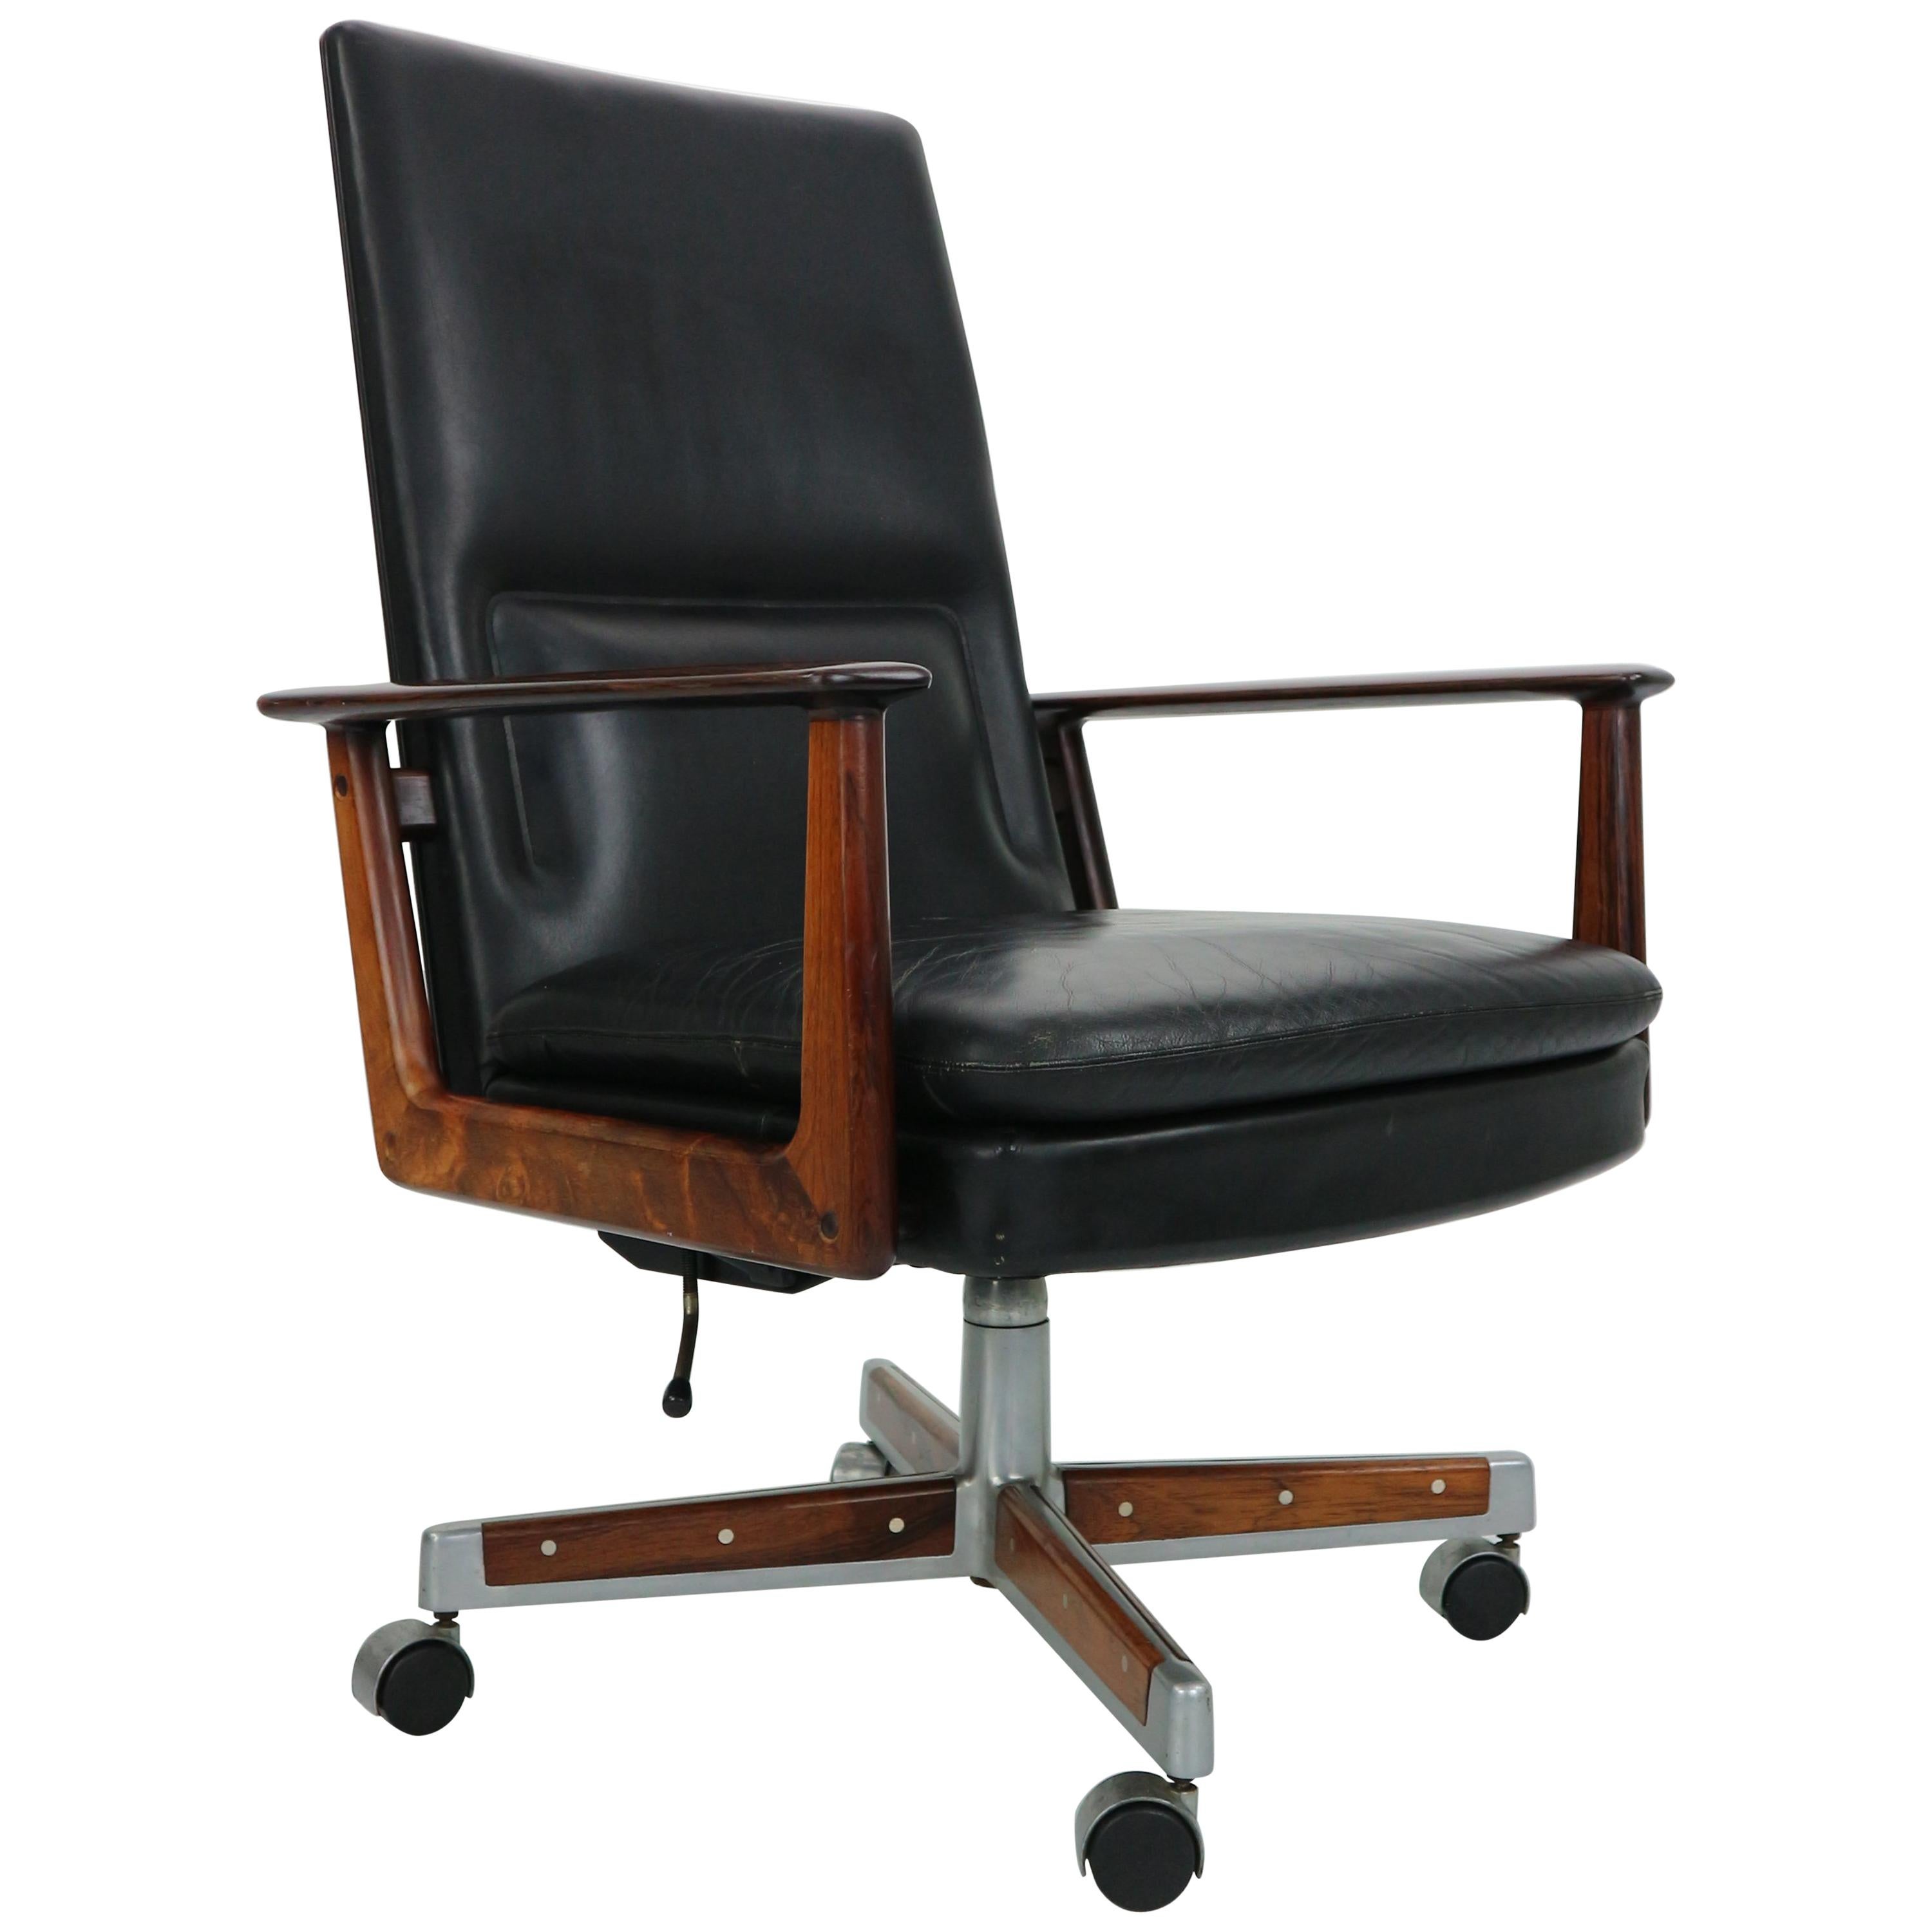 Rosewood& Leather Executive Office Chair by Arne Vodder for Sibast, 1960 Denmark